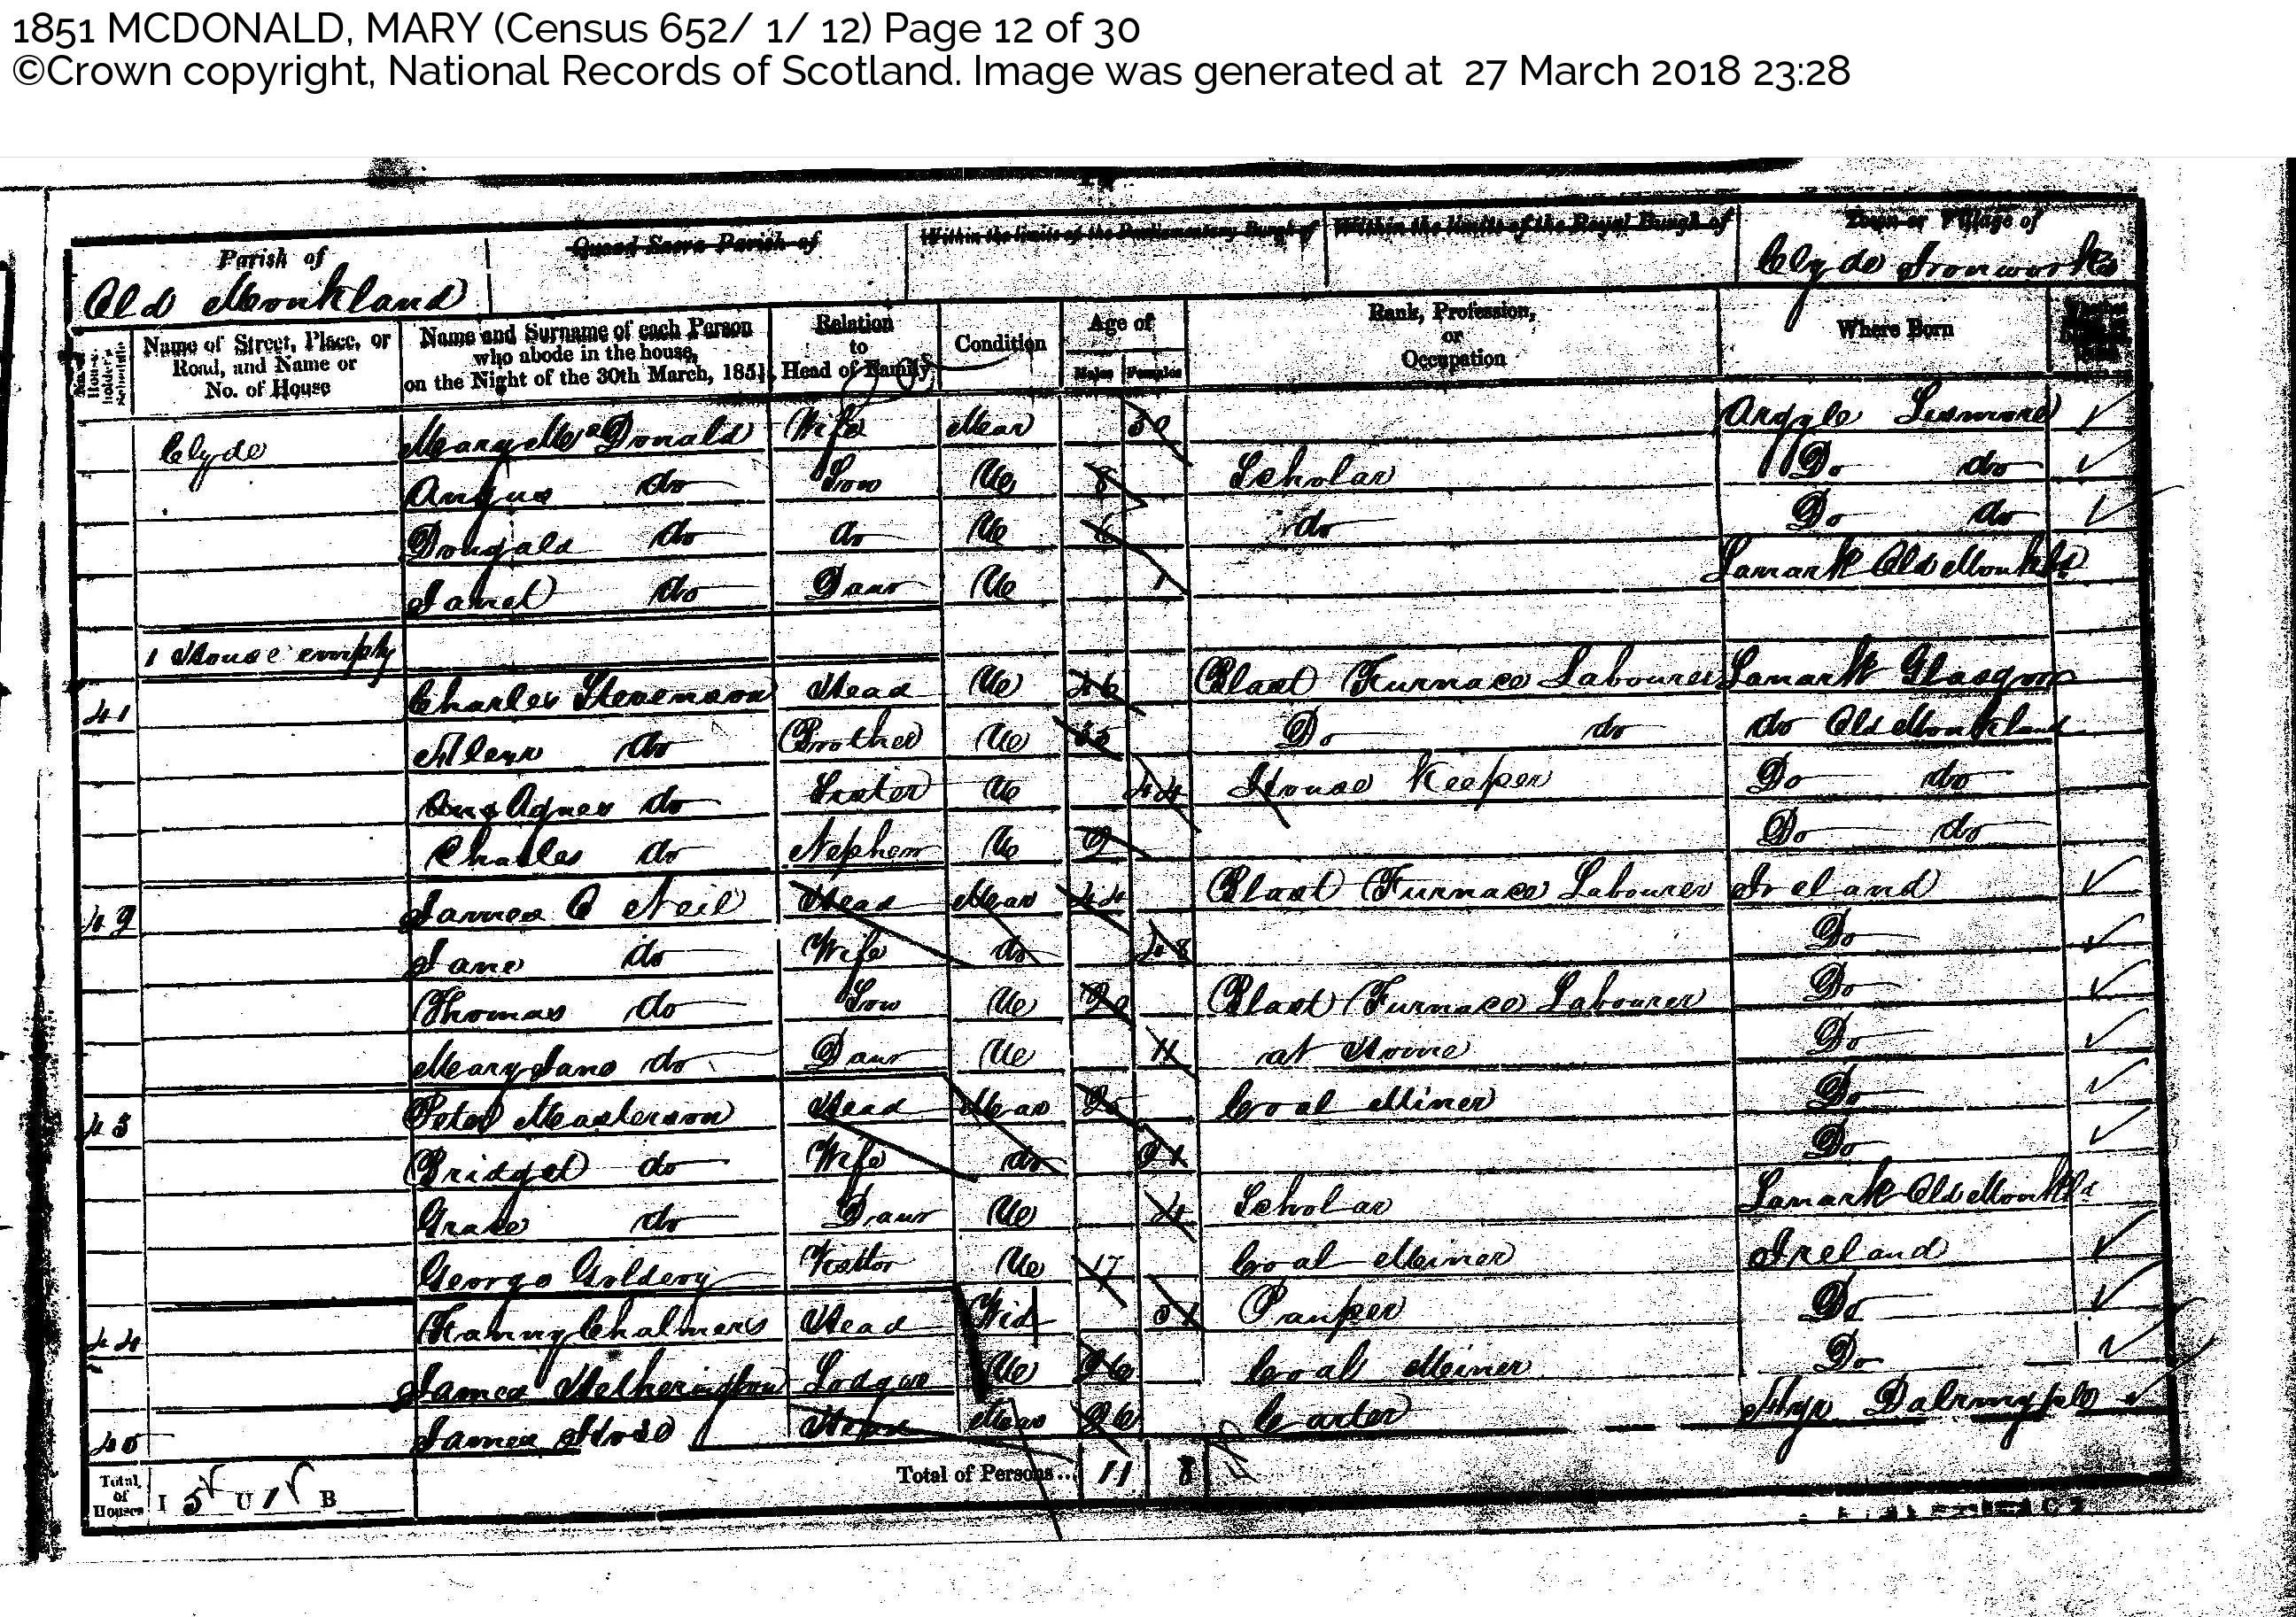 Mcdonald family 1851 census pg2, Linked To: <a href='profiles/i661.html' >Mary McGregor 🧬</a>